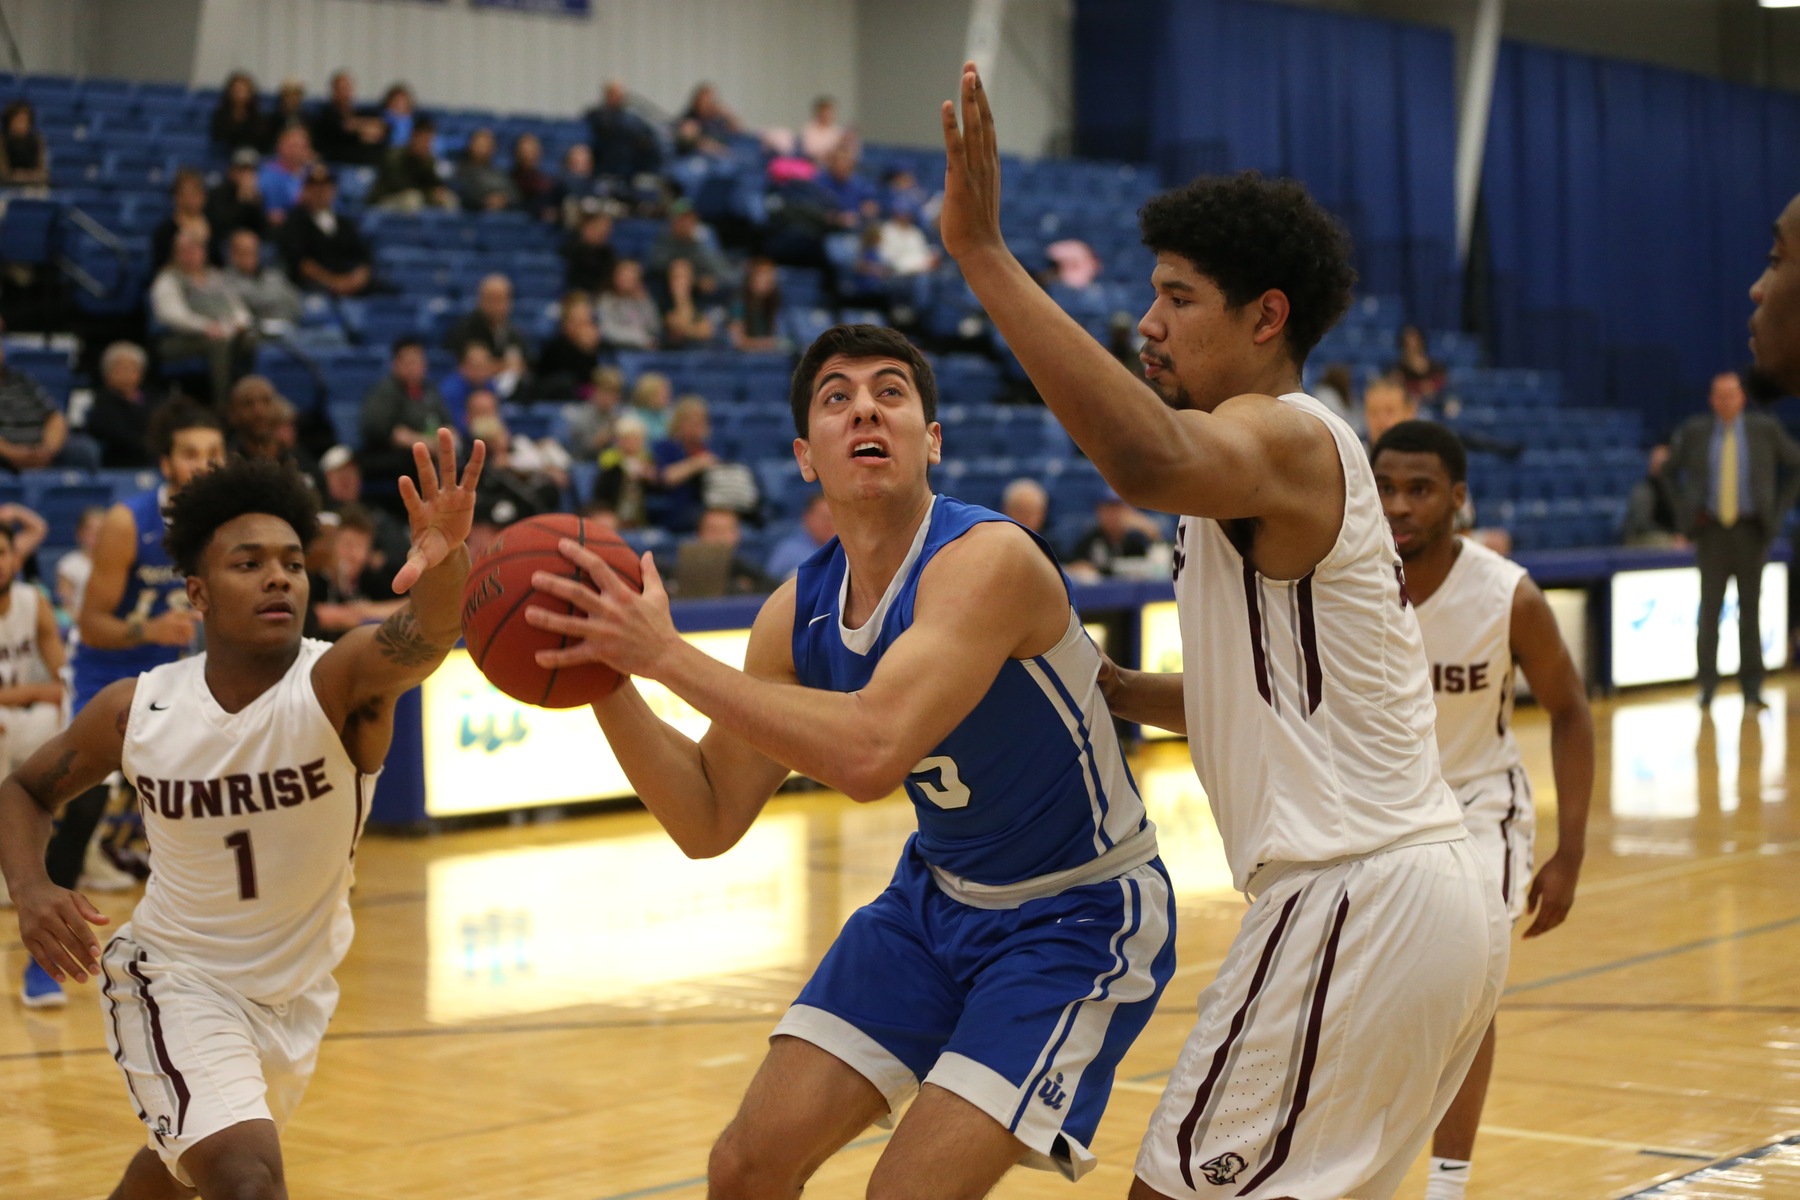 #20 Iowa Western's Beto Diaz and his Reiver teammates jumped out to a 47-20 haltime lead in game one of the State Fair Roadrunner Tip-Off Classic en-route to a 99-59 victory.